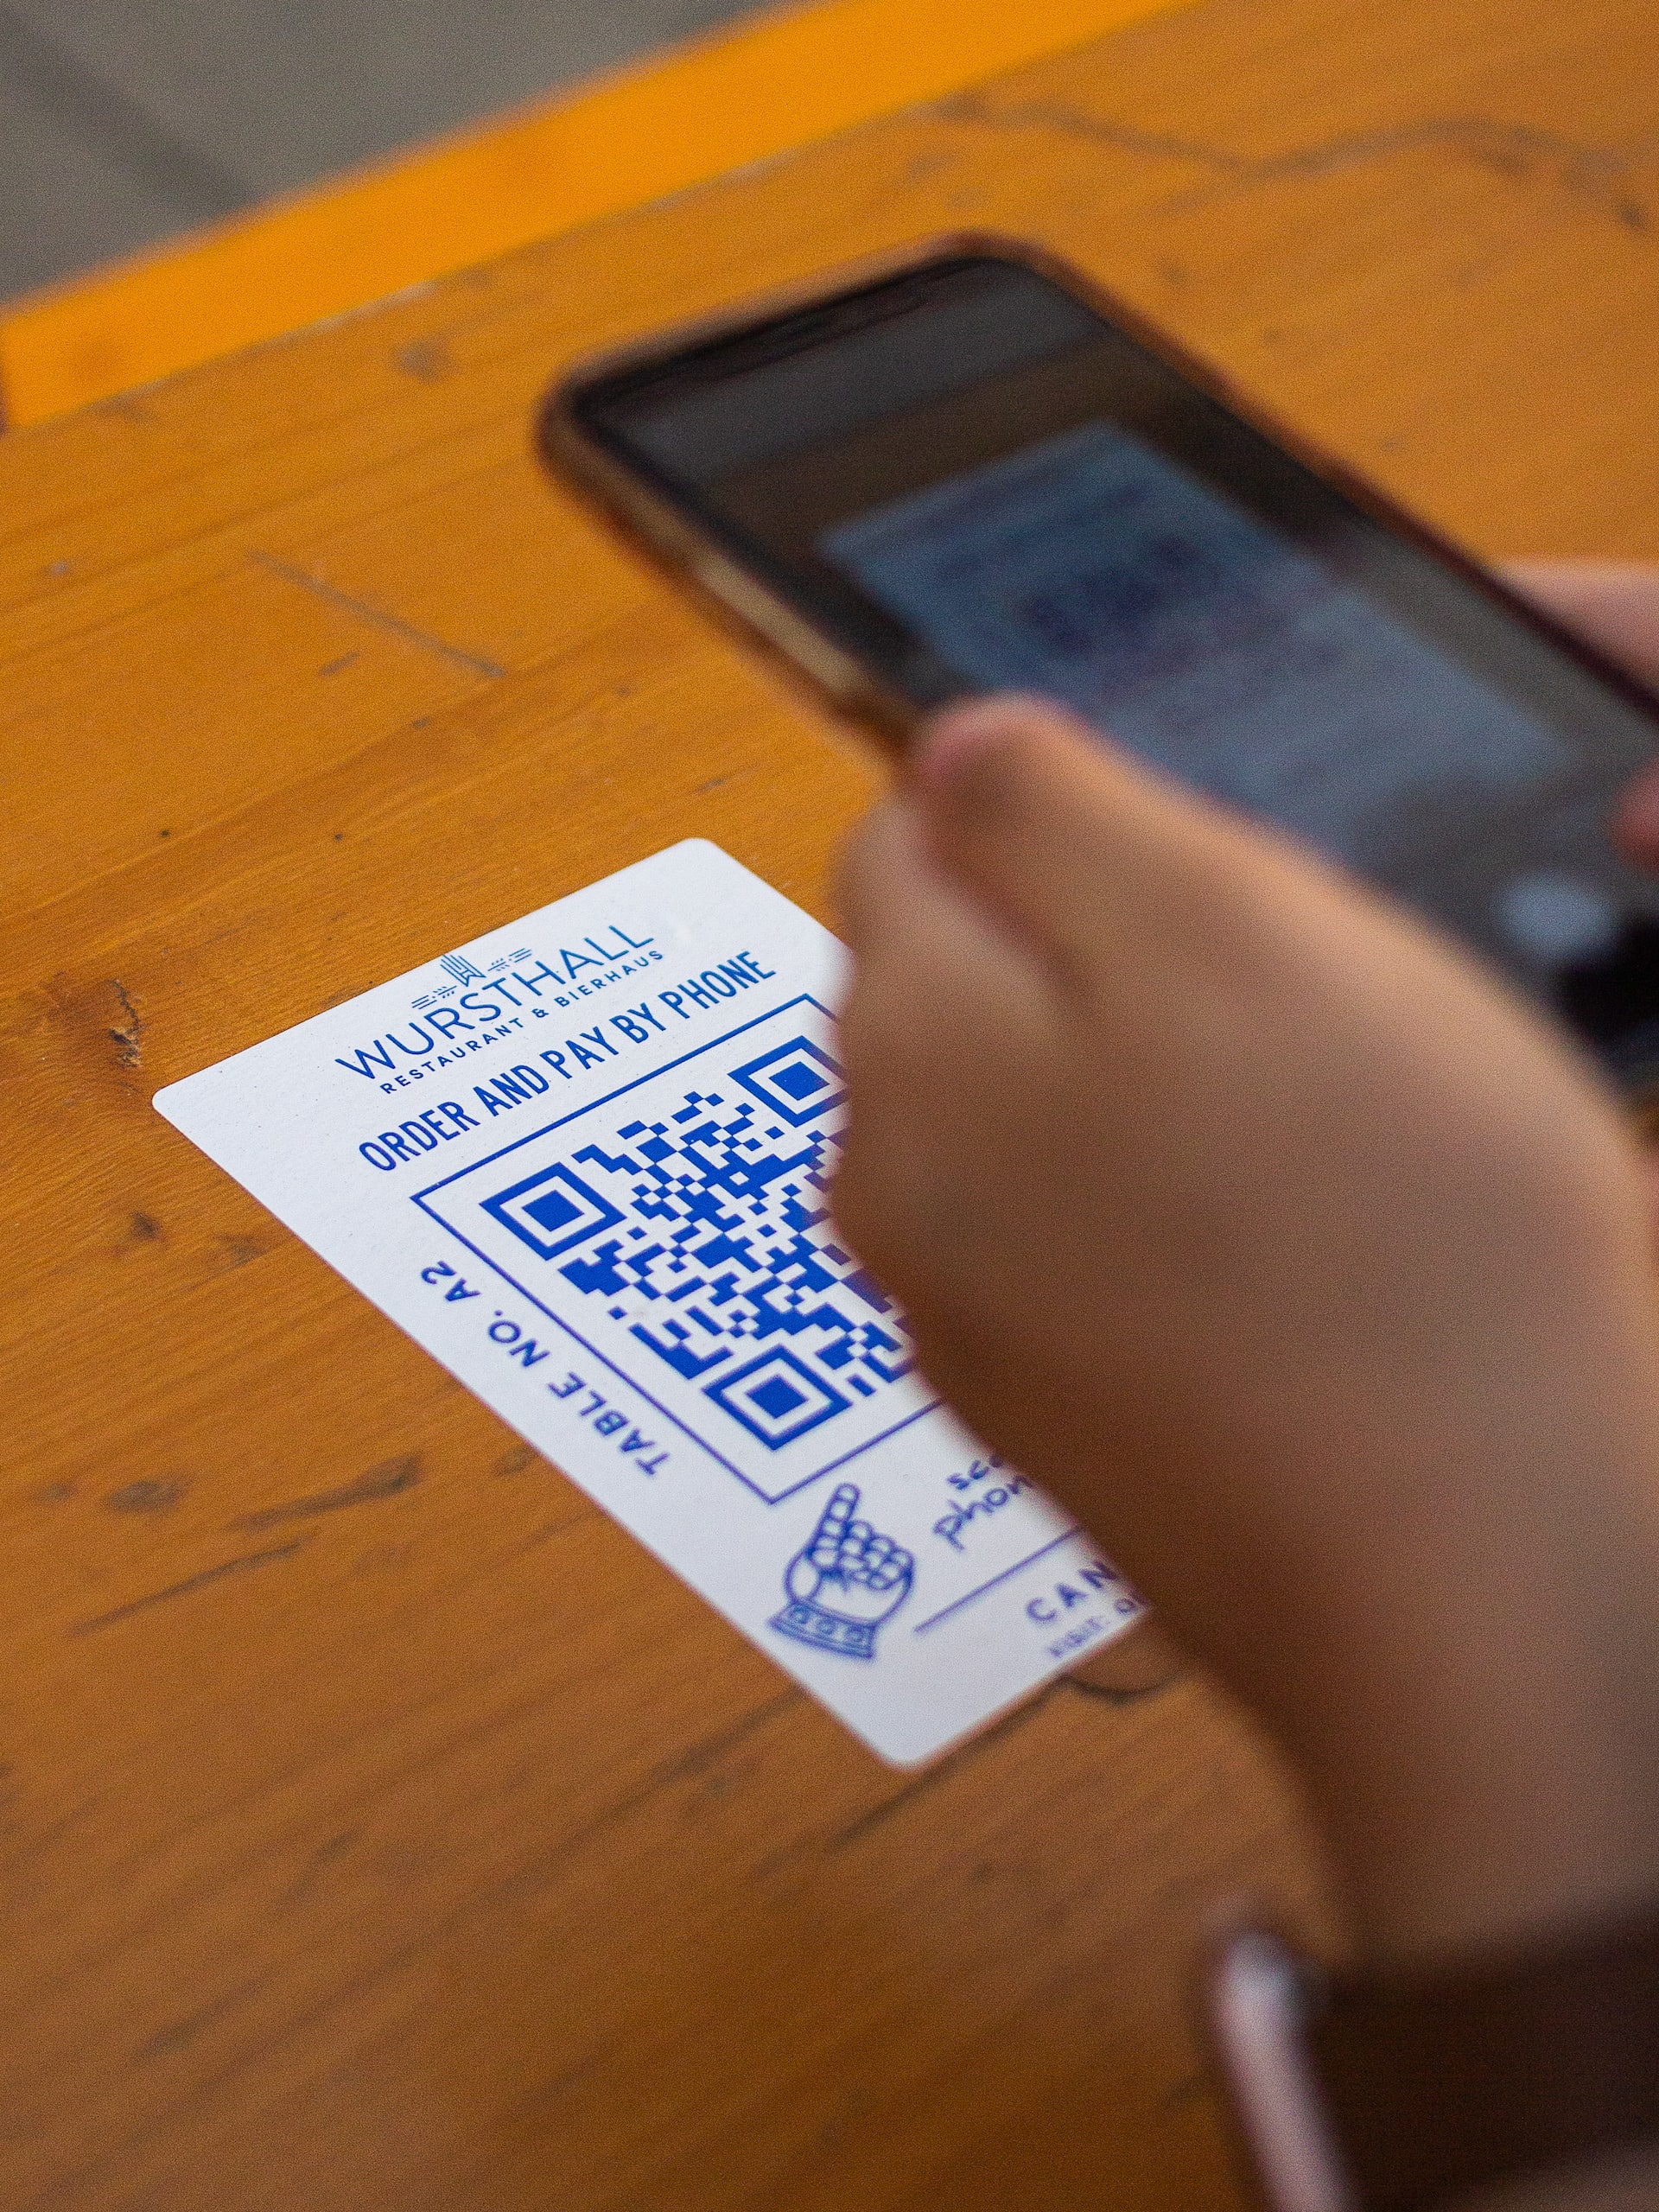 Somebody scanning a QR code